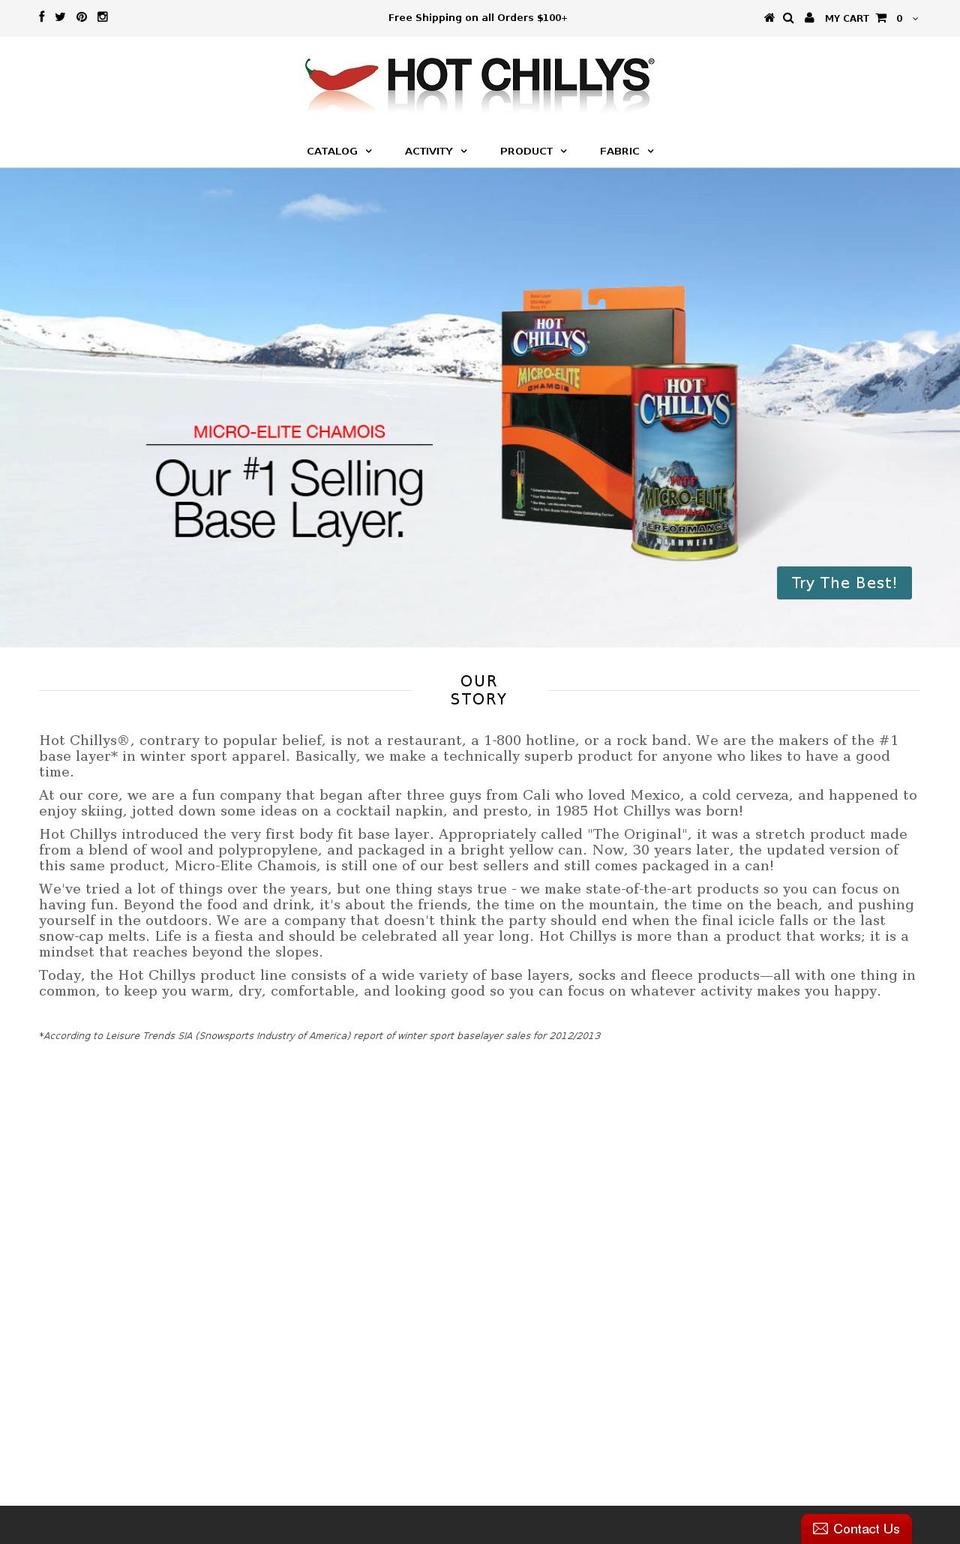 Motion Shopify theme site example hotchillys.com